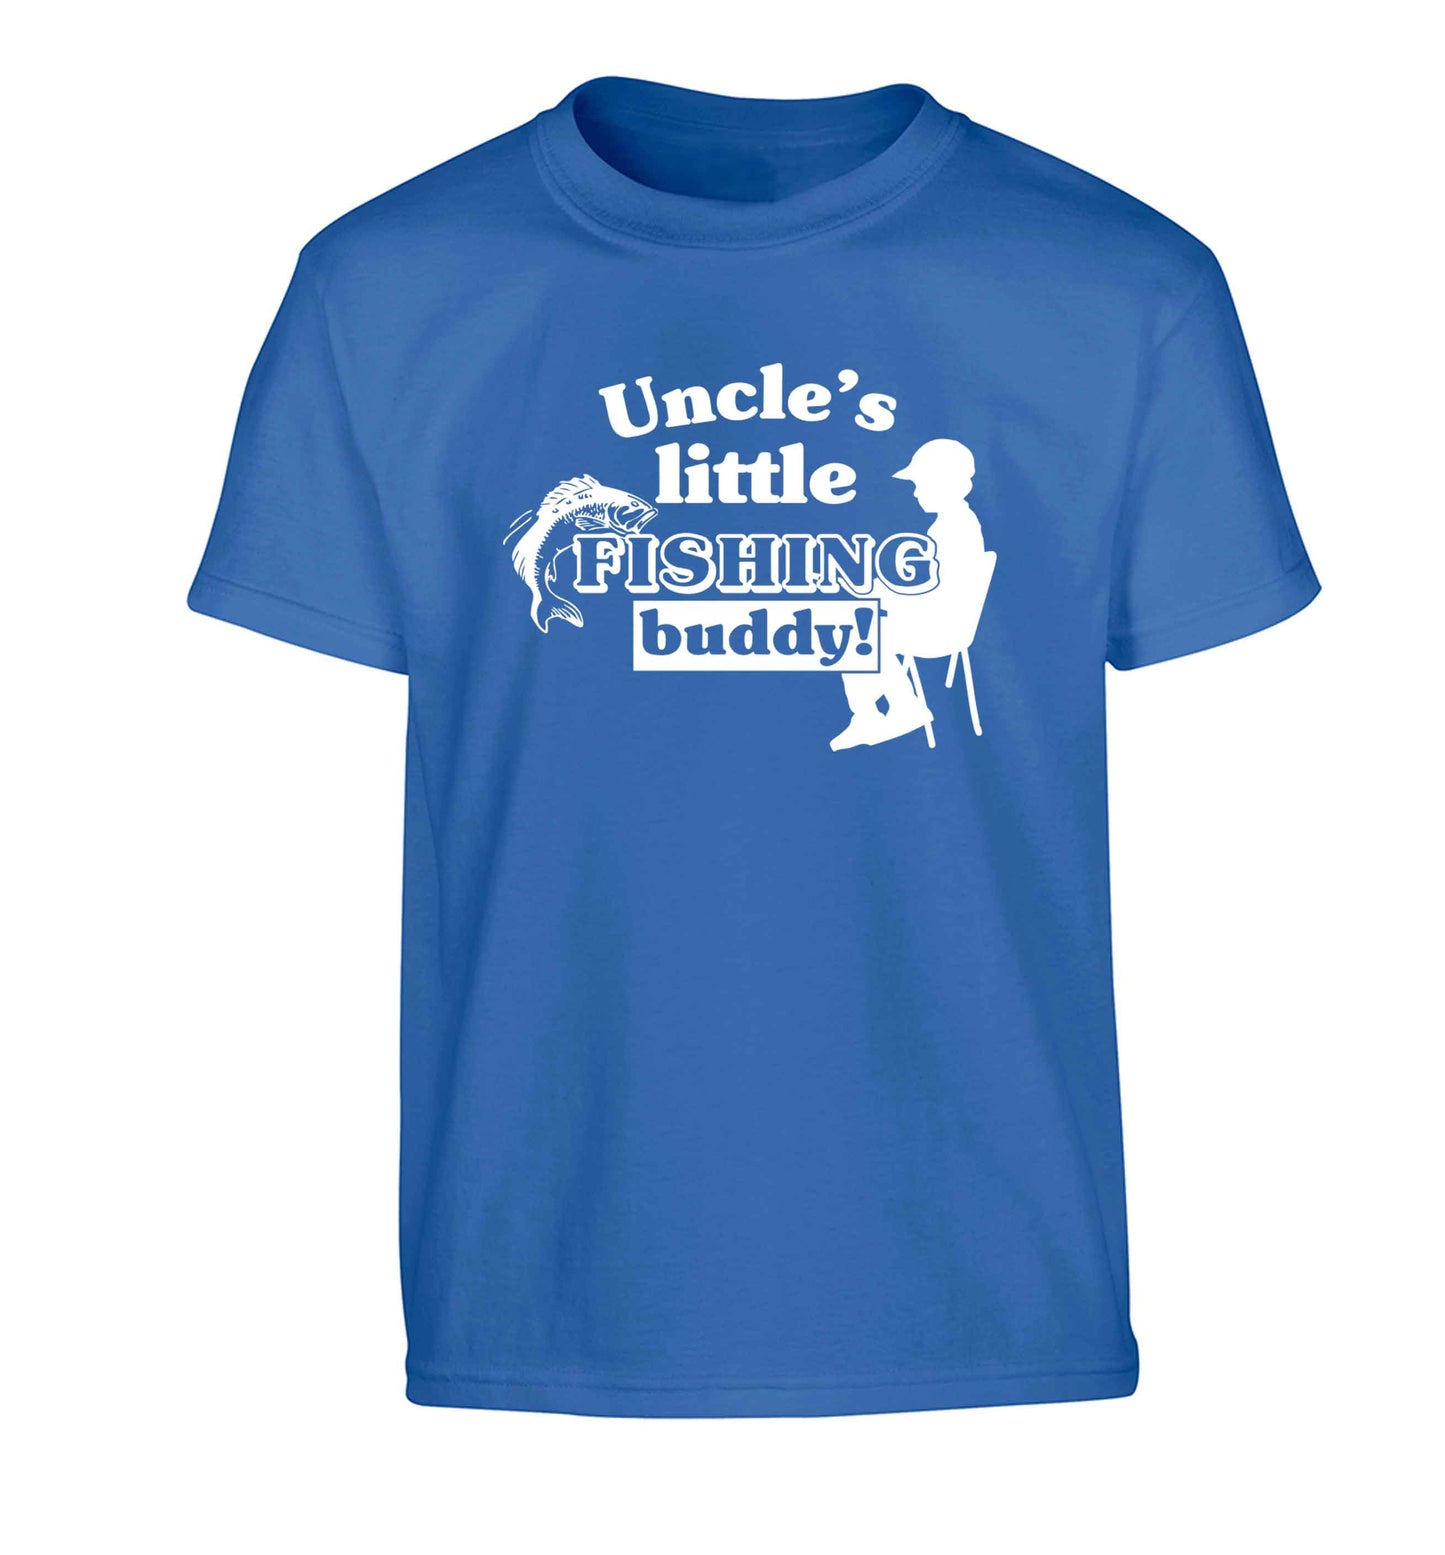 Uncle's little fishing buddy Children's blue Tshirt 12-13 Years